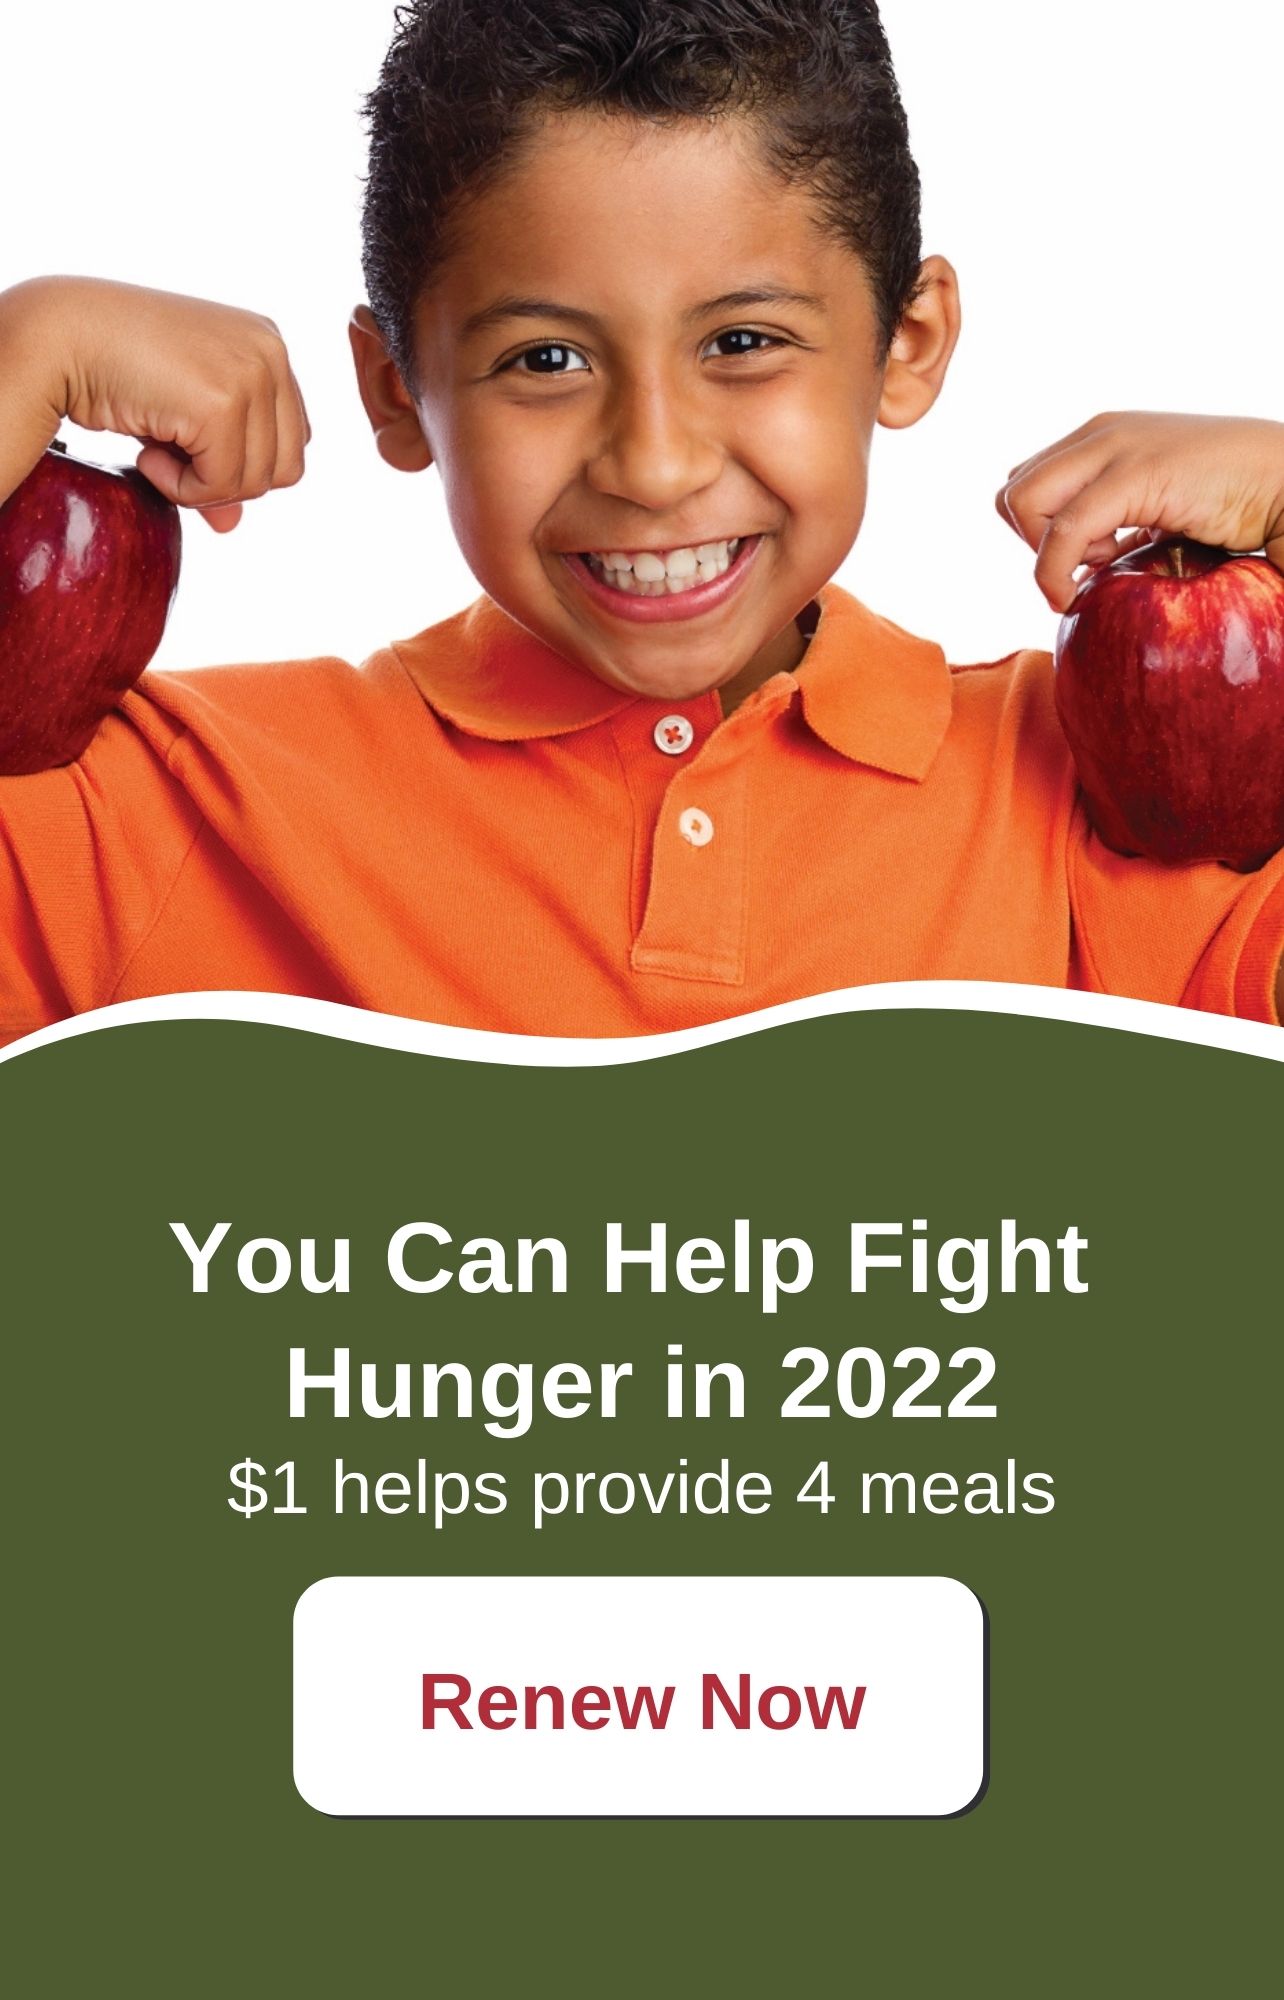 You Can Help Fight Hunger in 2022